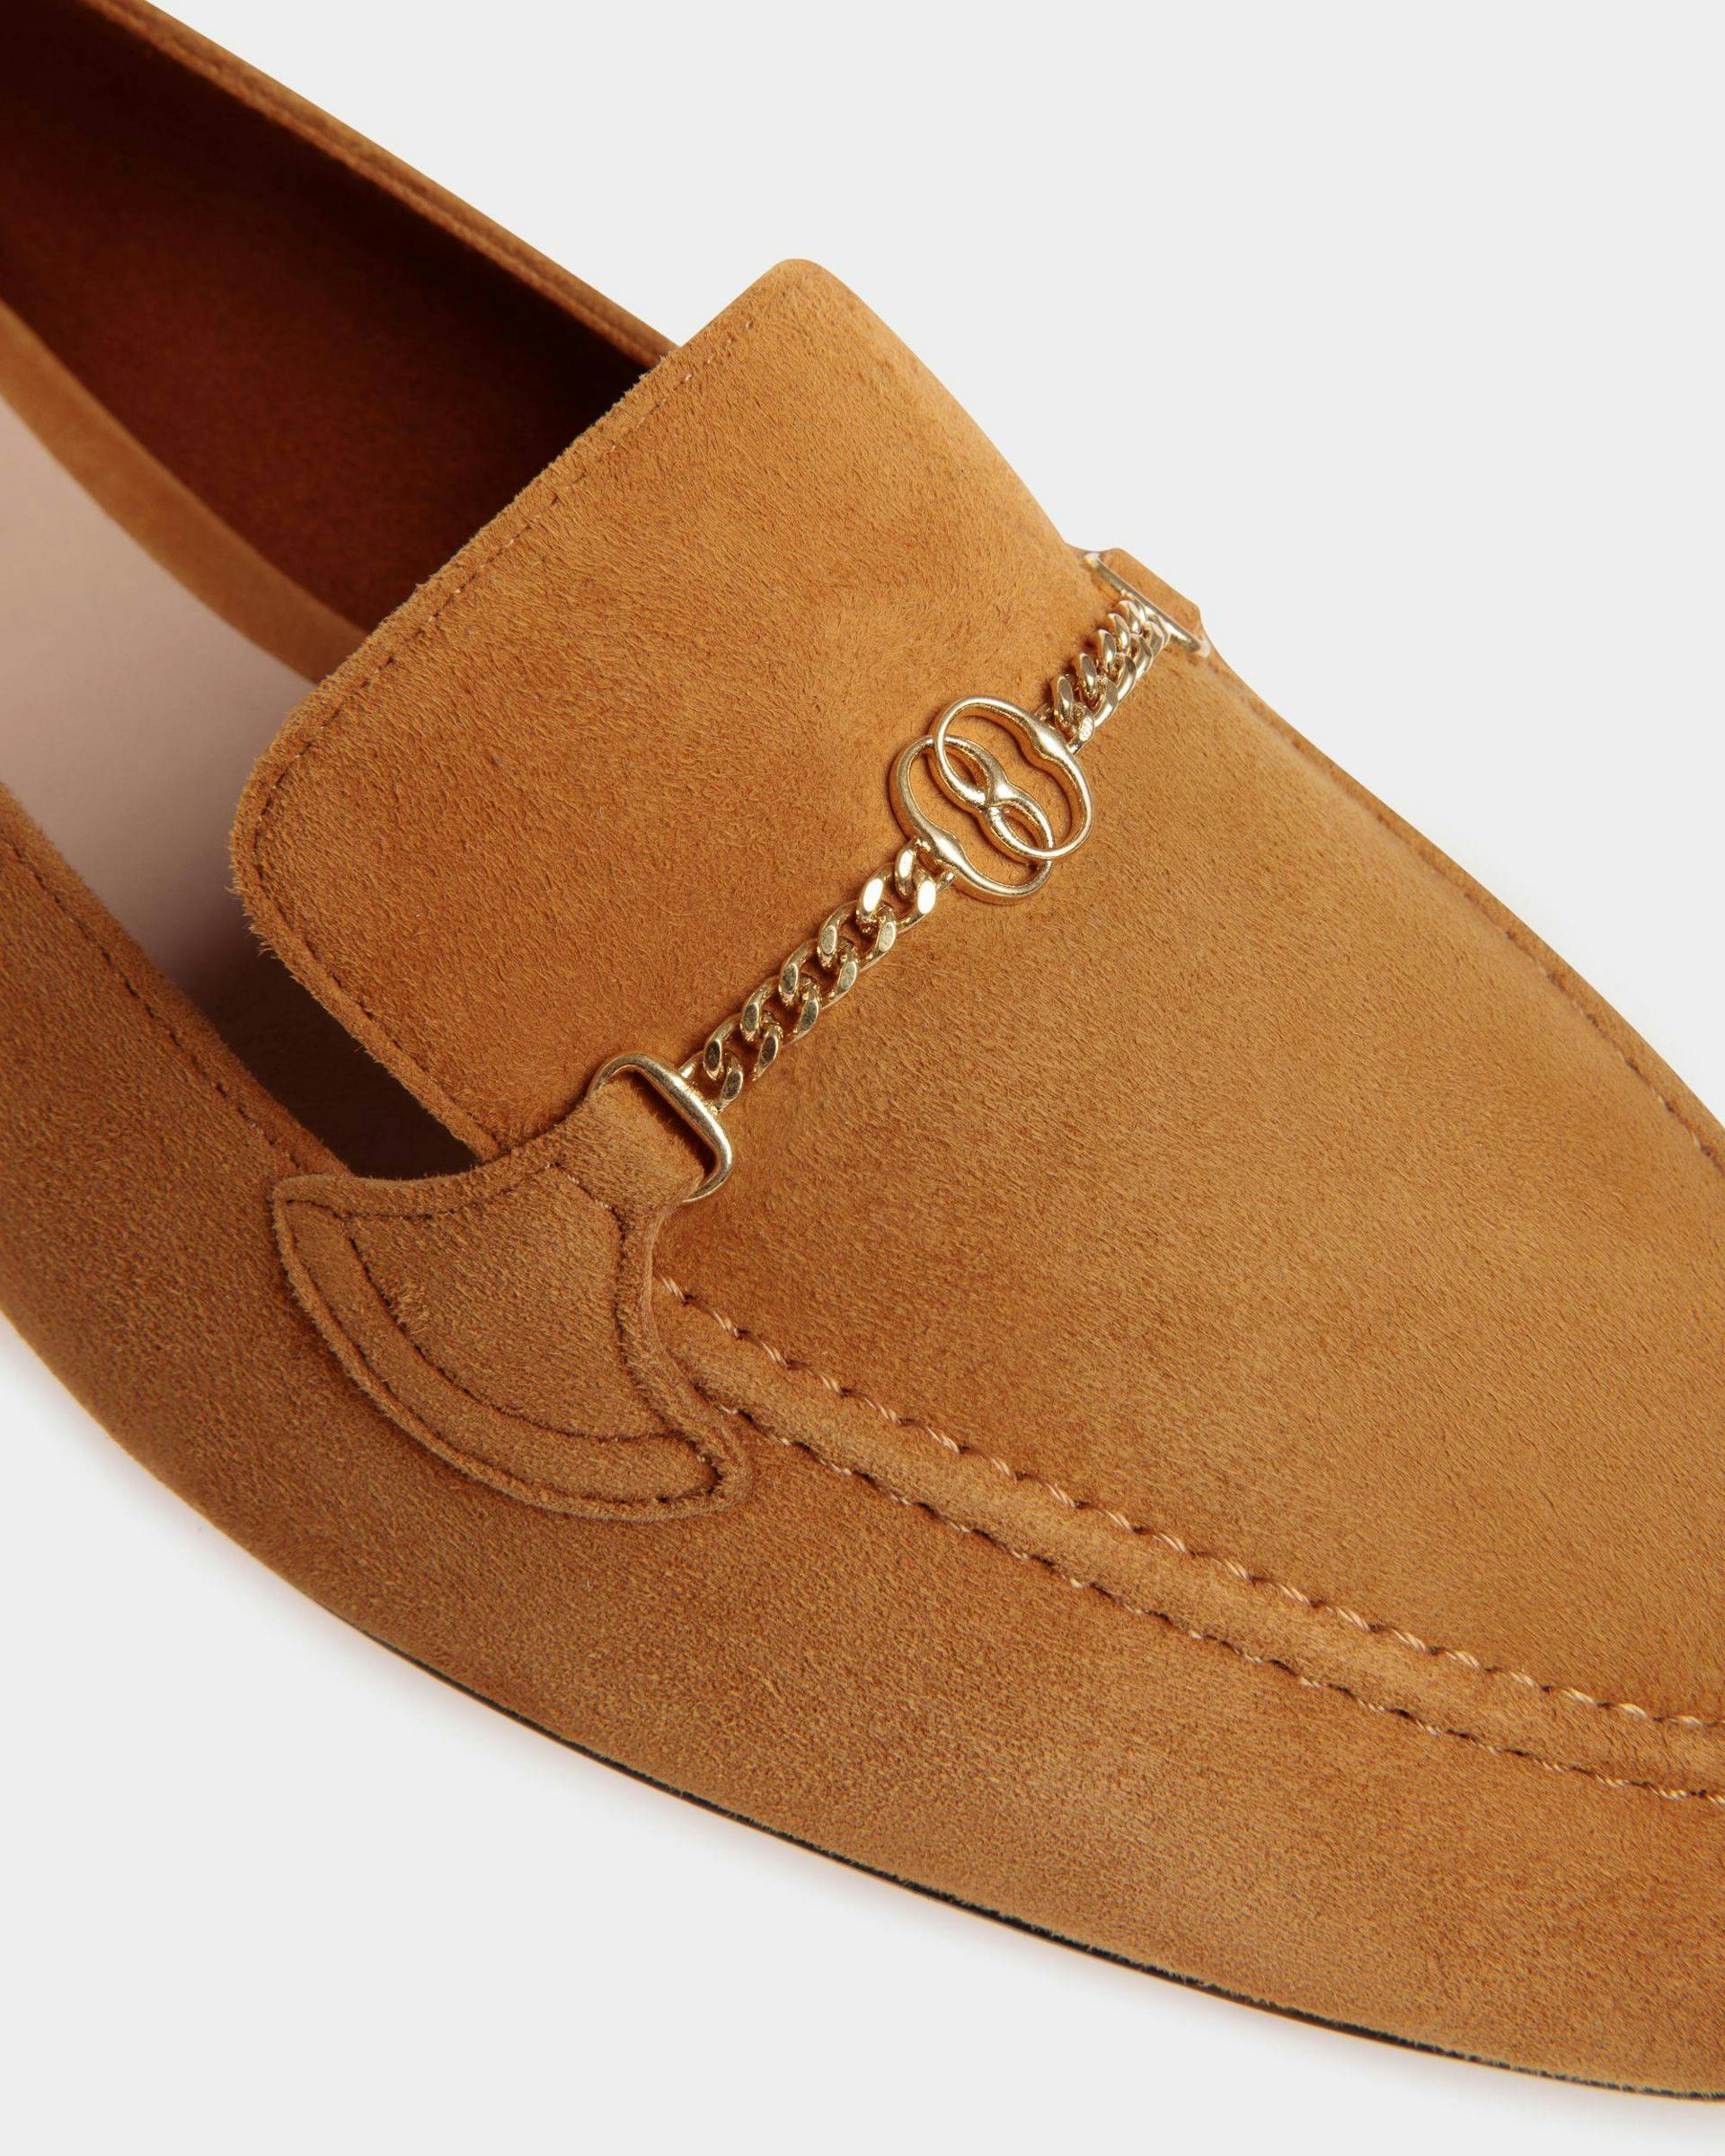 Women's Daily Emblem Loafer in Brown Suede | Bally | Still Life Detail